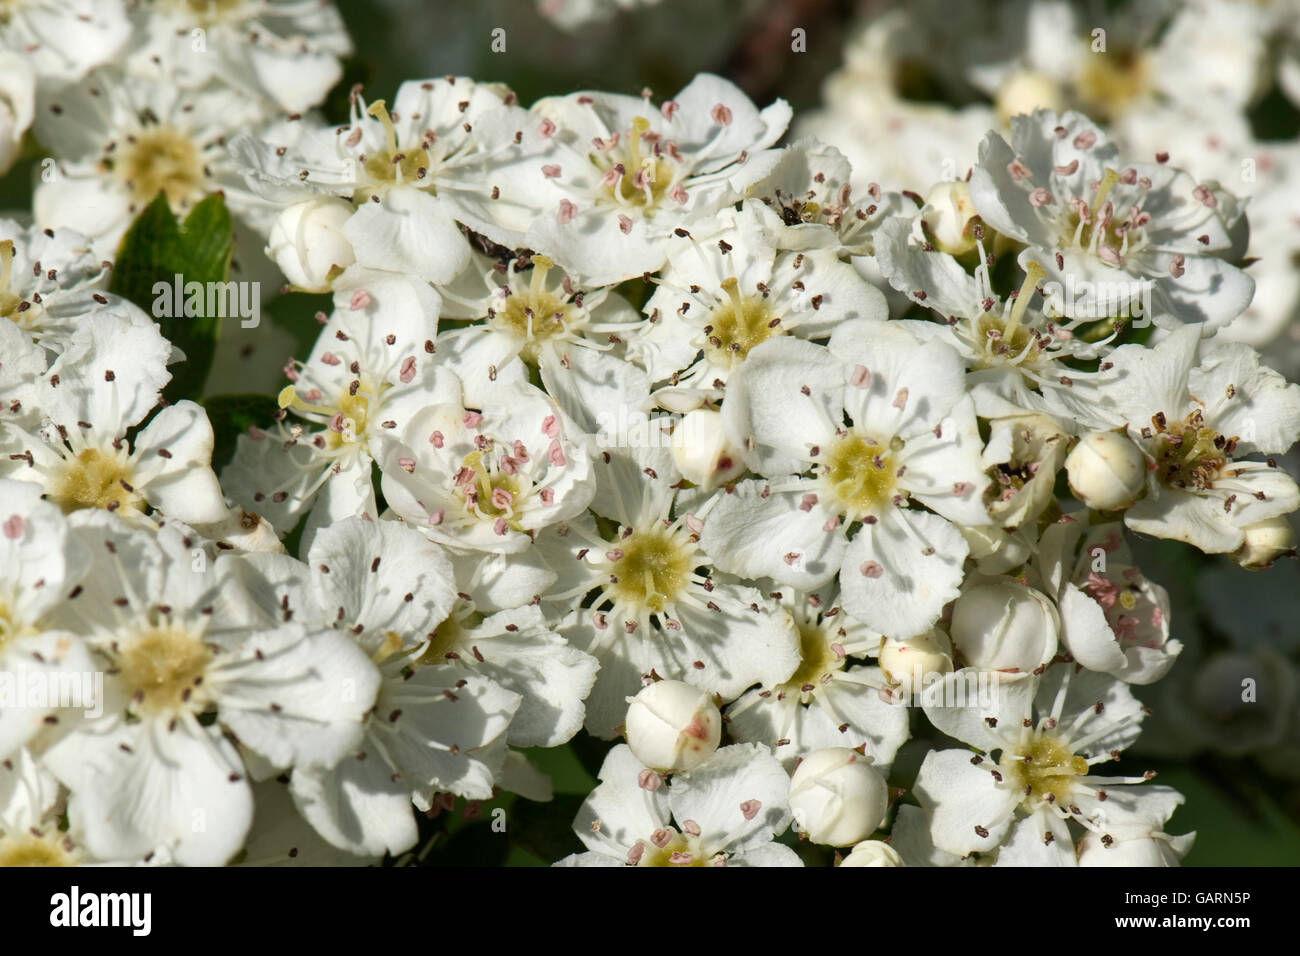 Whiite may or hawthorn blossom, Crataegus monogyna, pungent aromatic flowers in spring Stock Photo